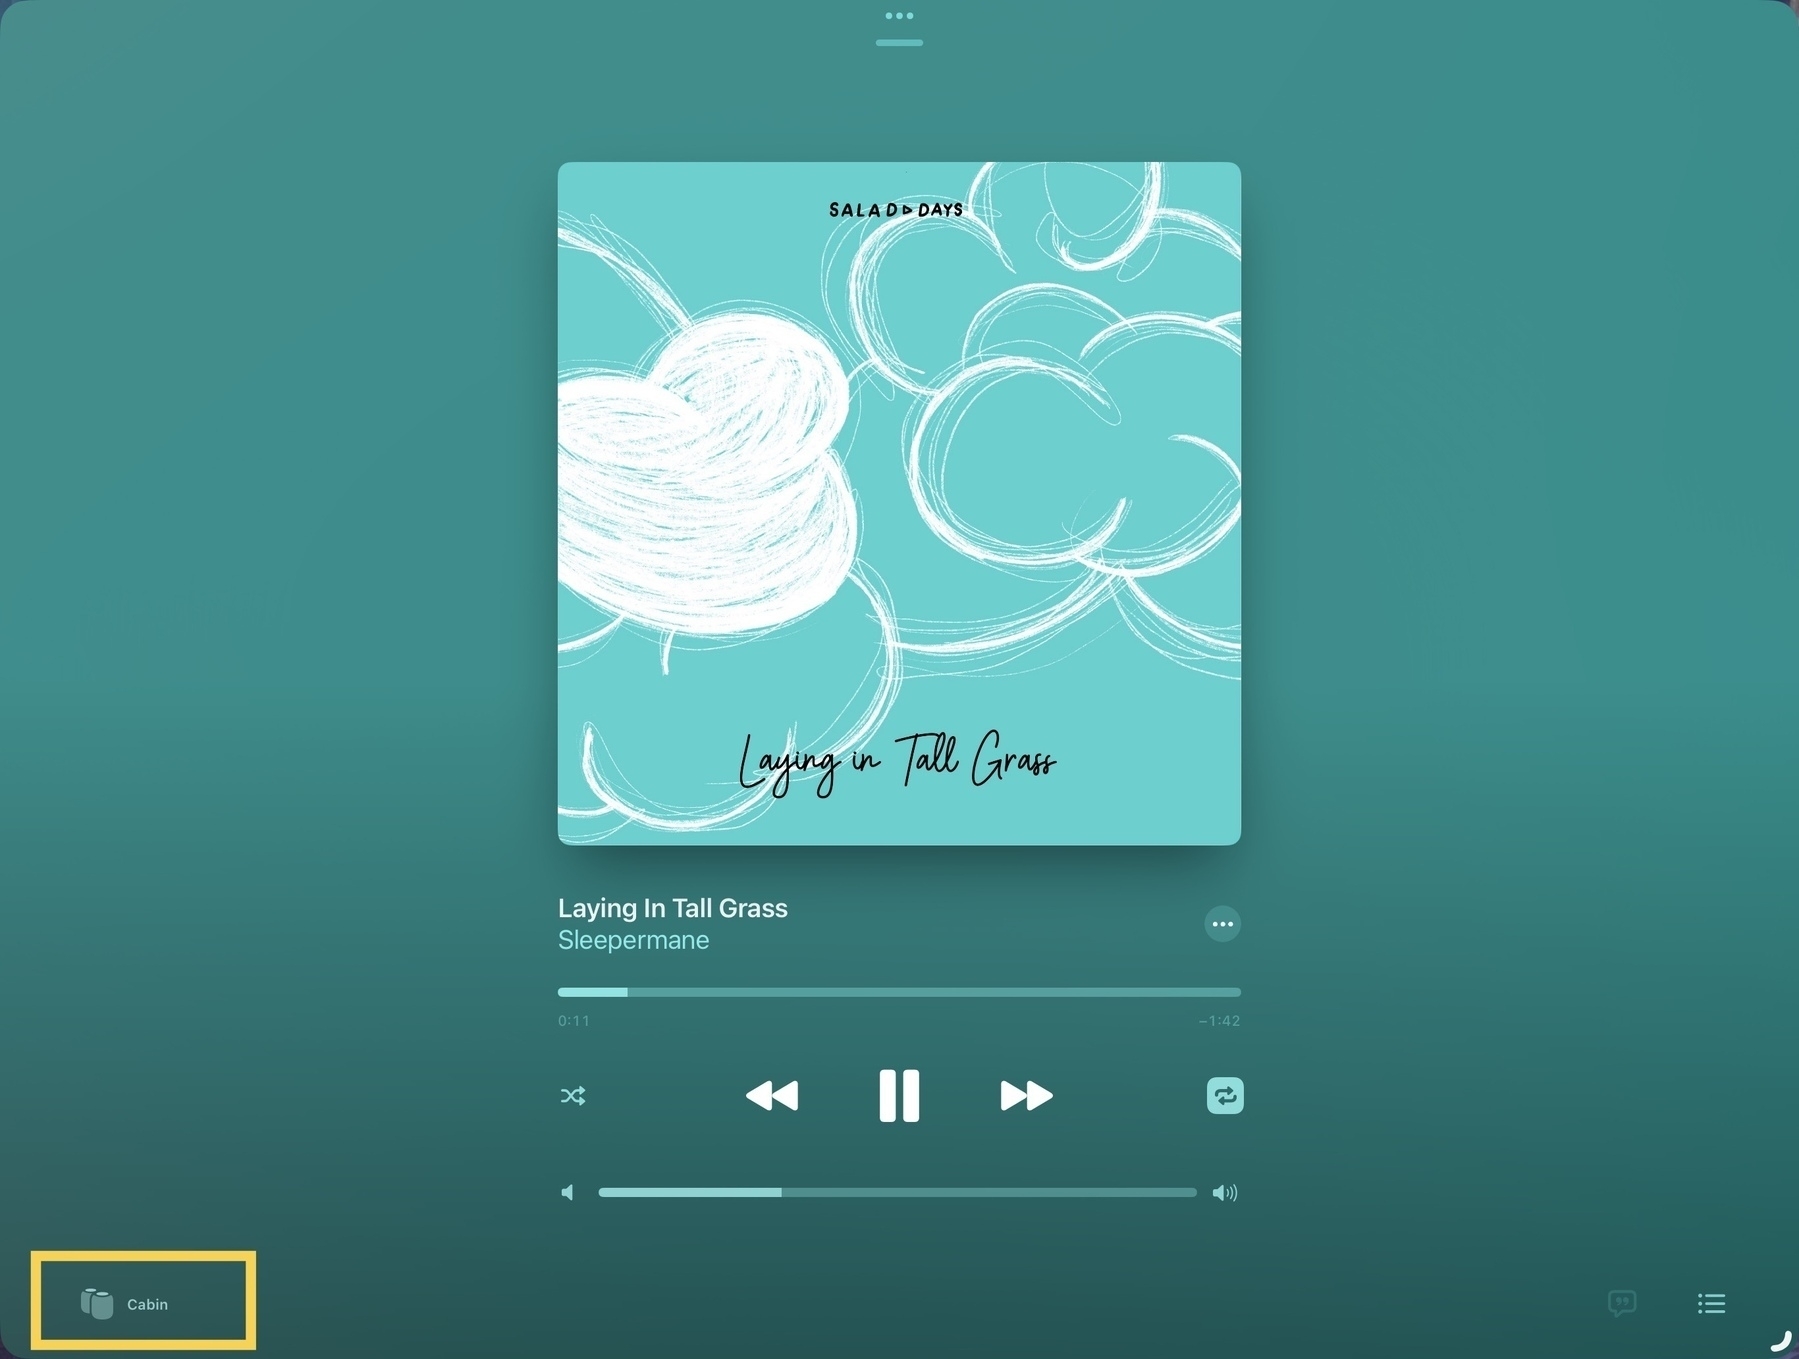 A screenshot showings the Music app on an iPad. A yellow box around the text Cabin demonstrates that audio is being played by a pair of HomePod speakers called Cabin